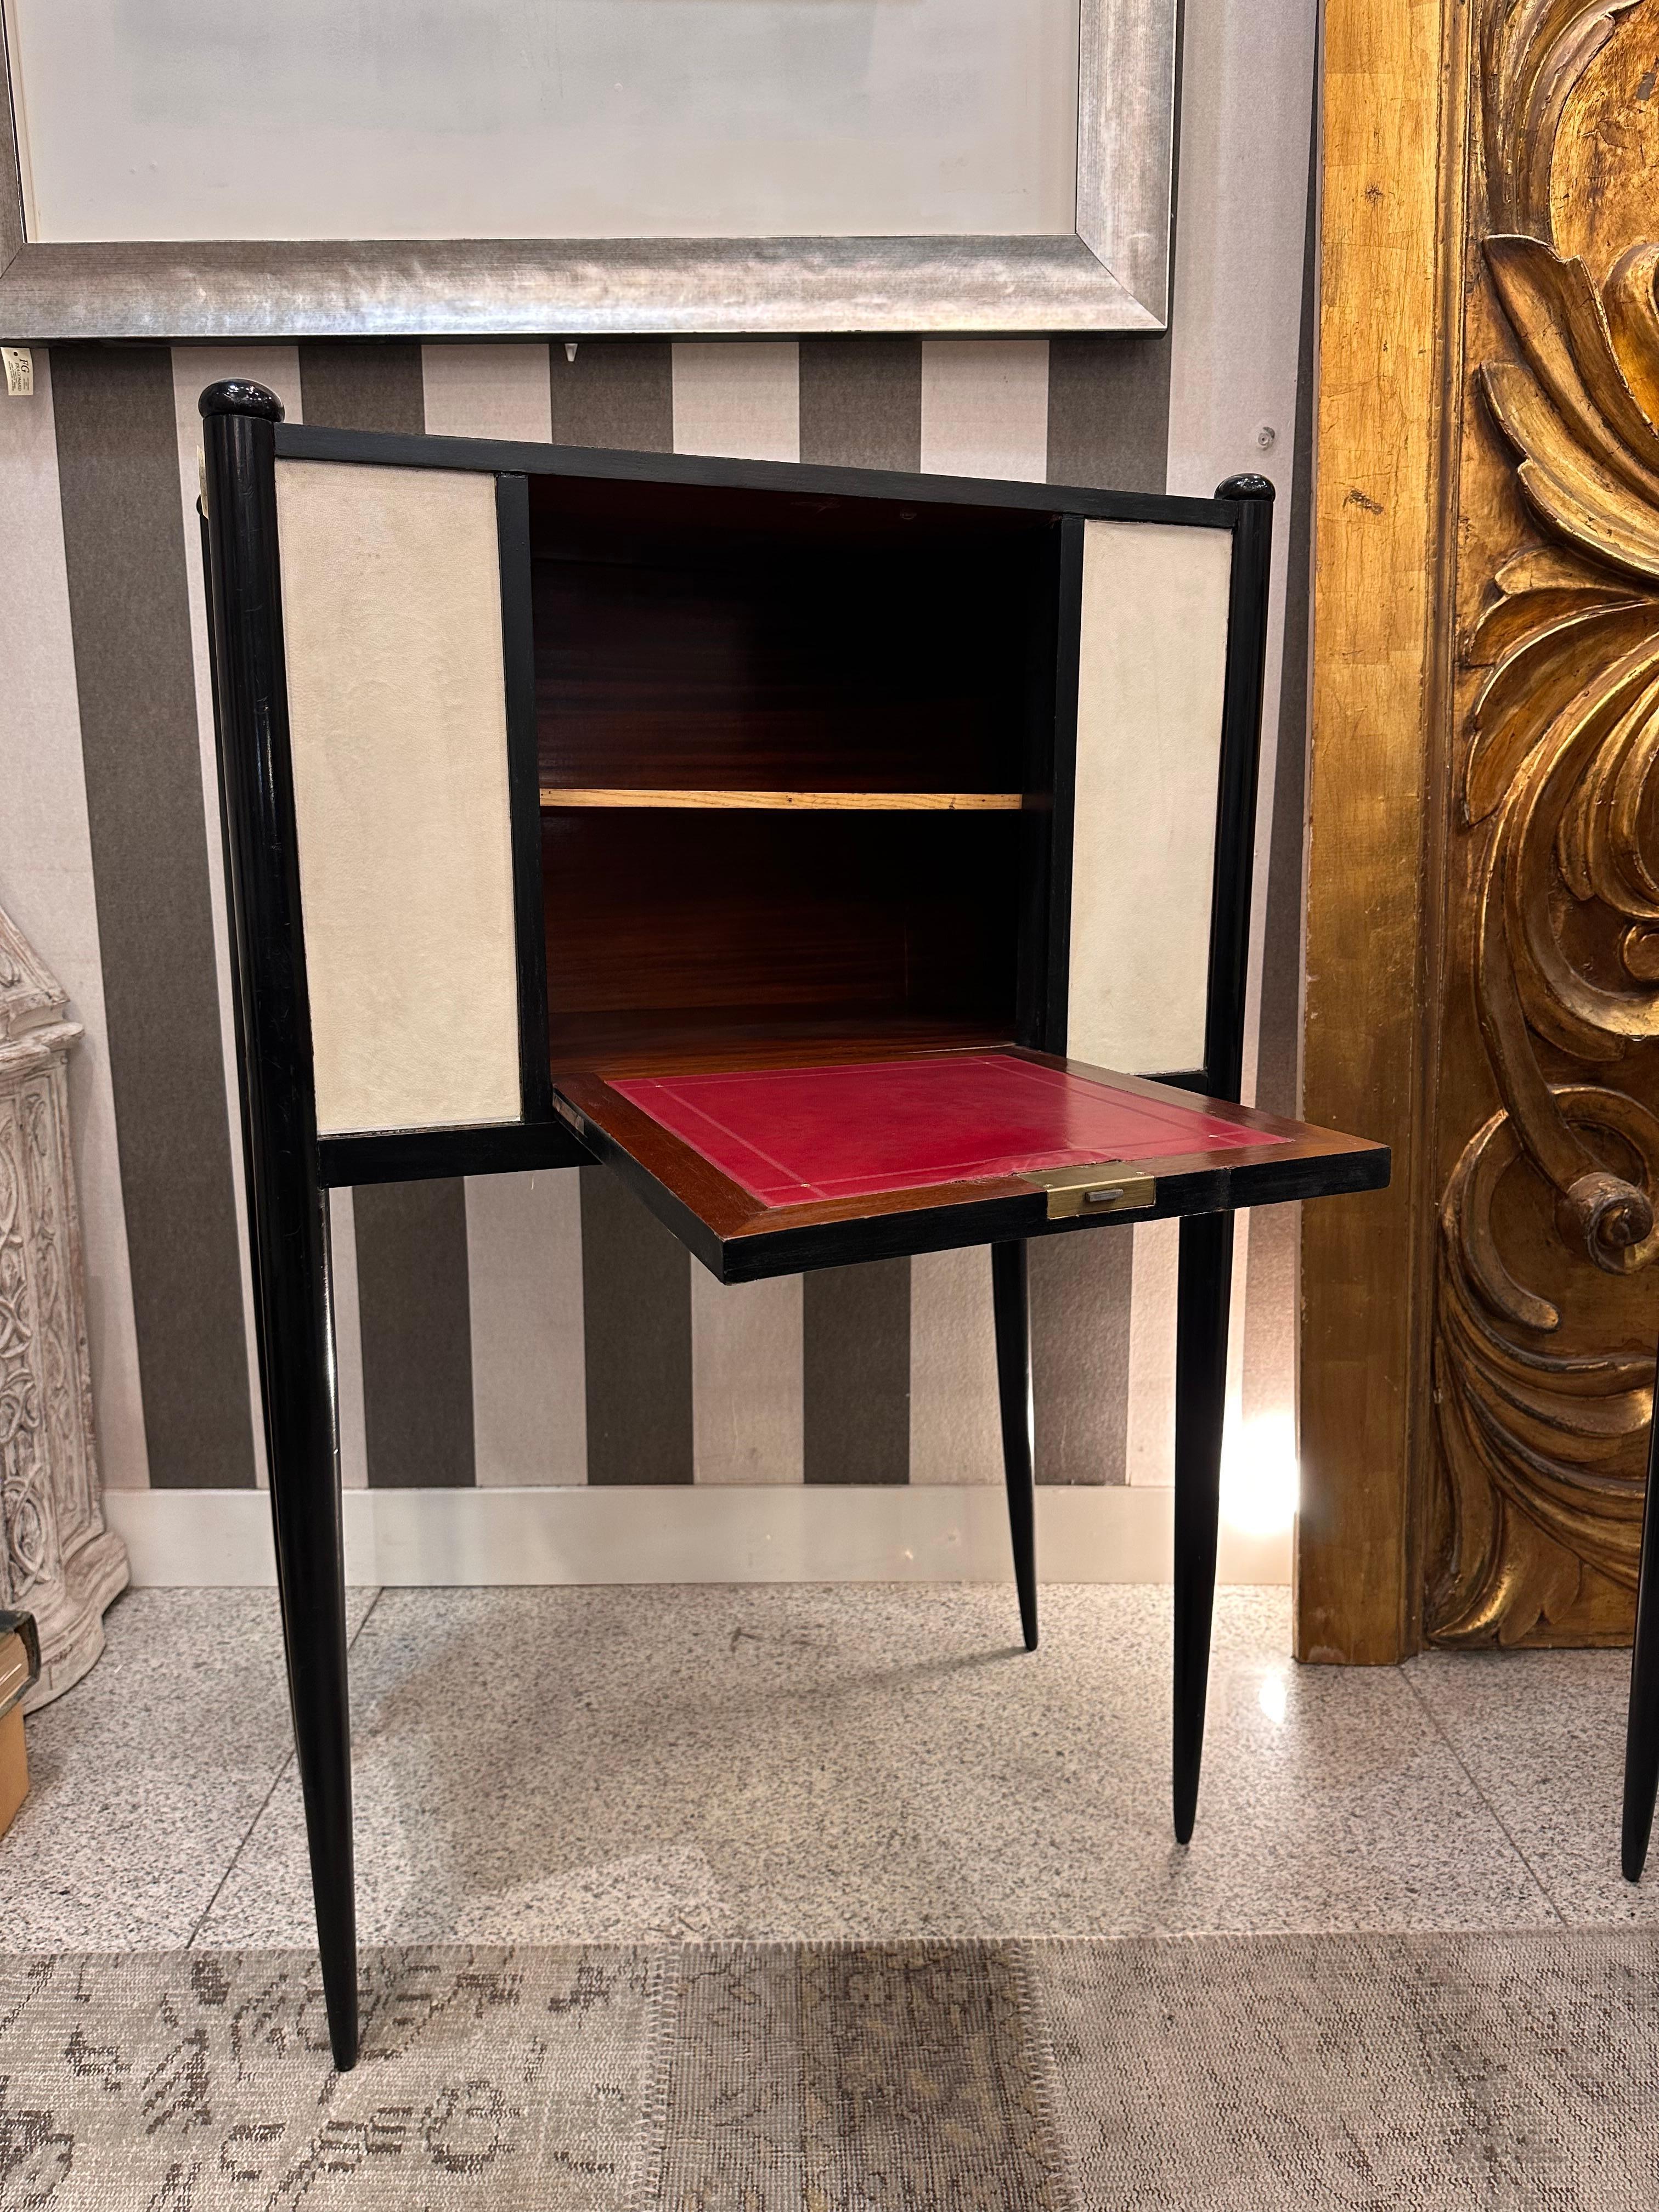  One of a kind pair of  cabinet-secretaire in black lacquer  wood and parchement  attibuted to Paolo Buffa (Milan, Italy, 1903-1970).

The furniture designed by the Milanese architect and designer Paolo Buffa is often unique, based on the needs of